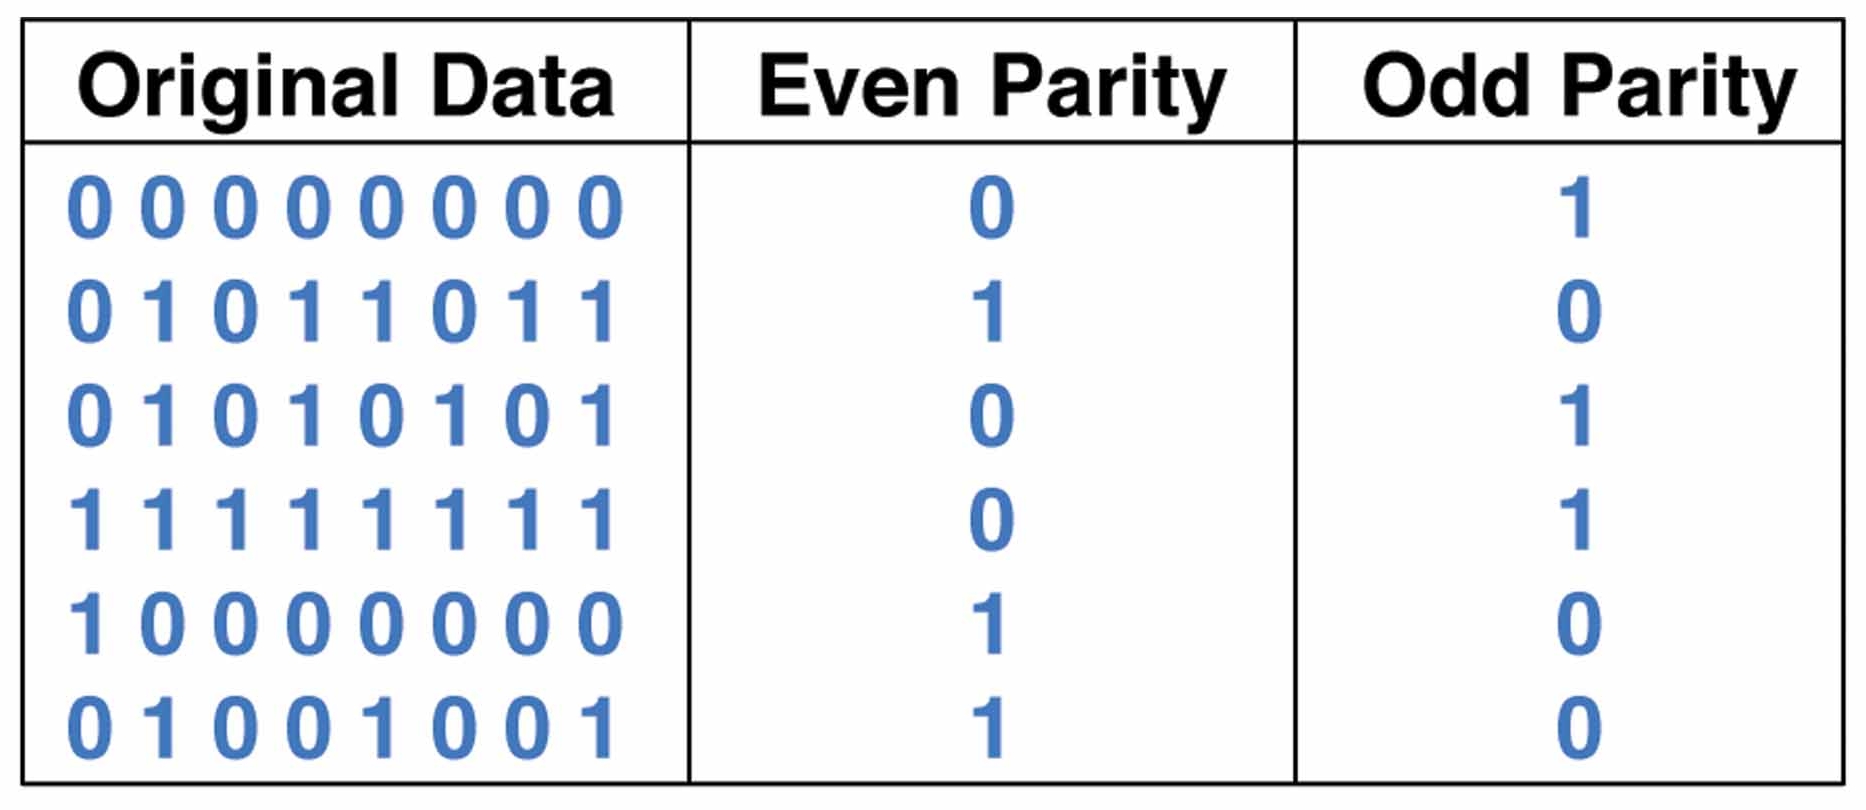 parity checking example